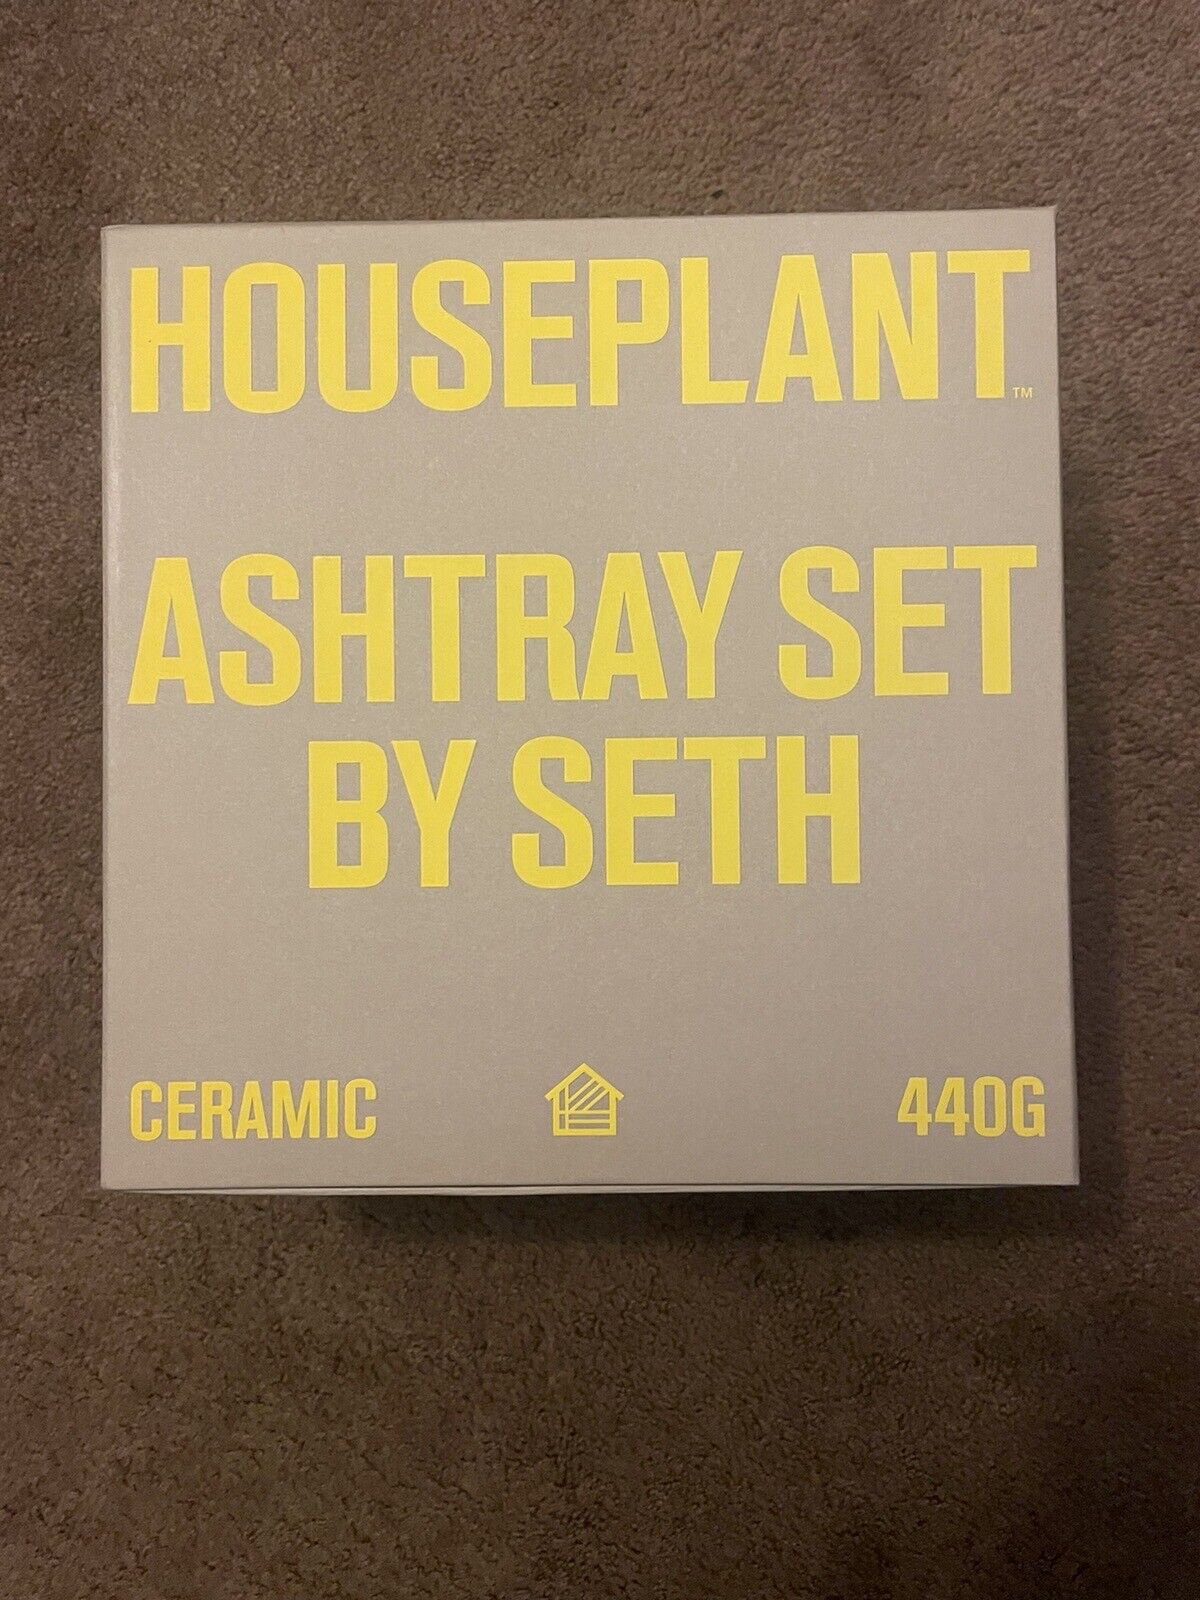 Houseplant Ashtray Set in Moss, Kitted - by Seth Rogen, Ceramic, 440G 2021